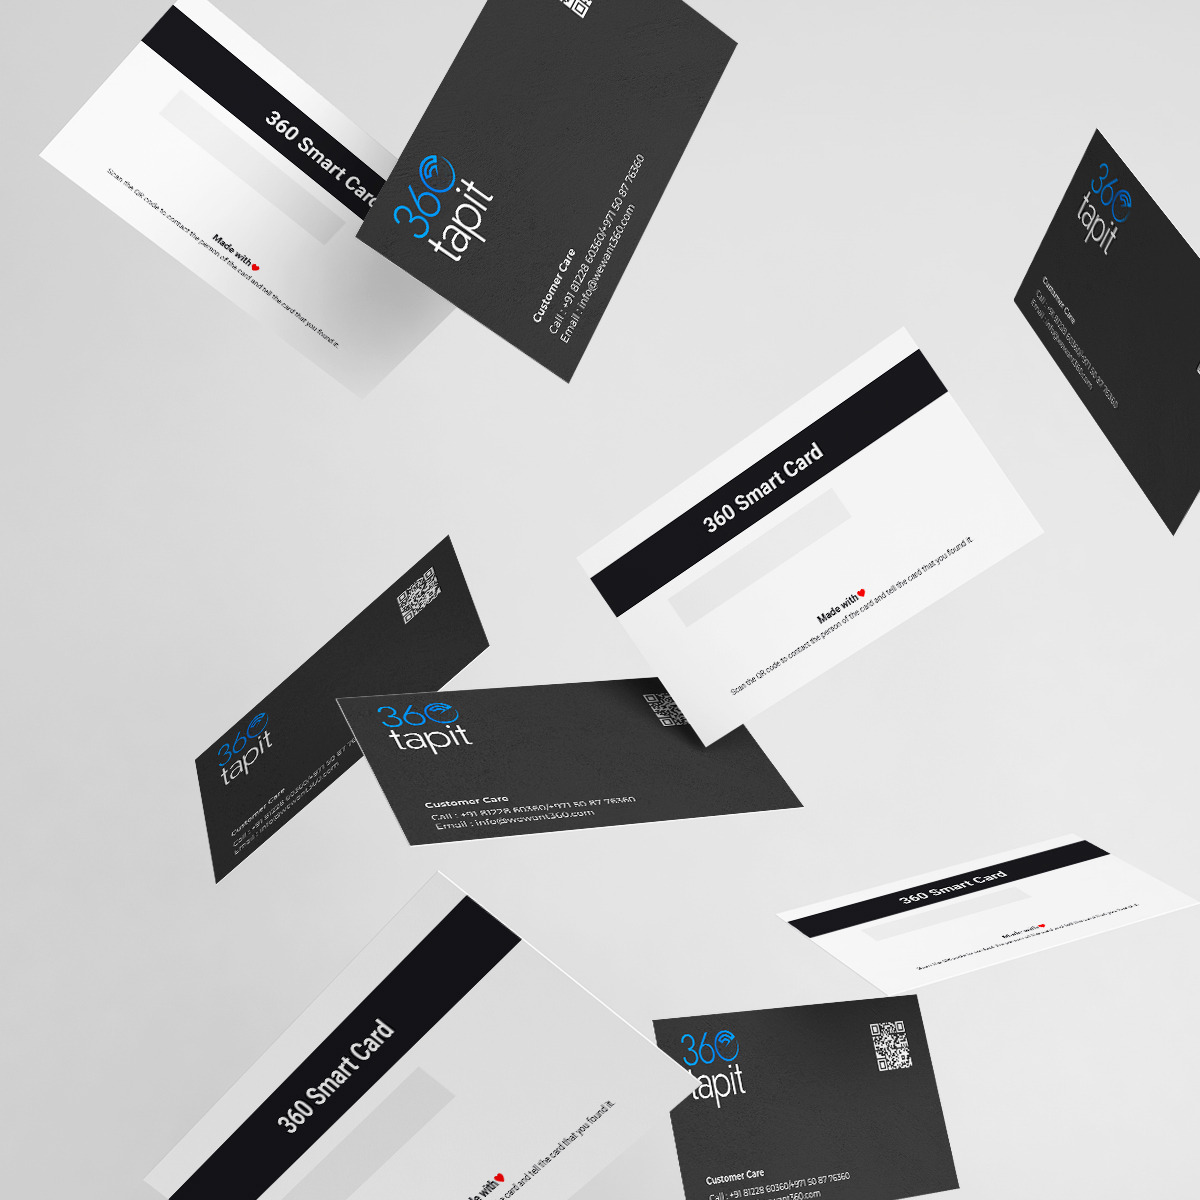 What is 360Tapit Business Card